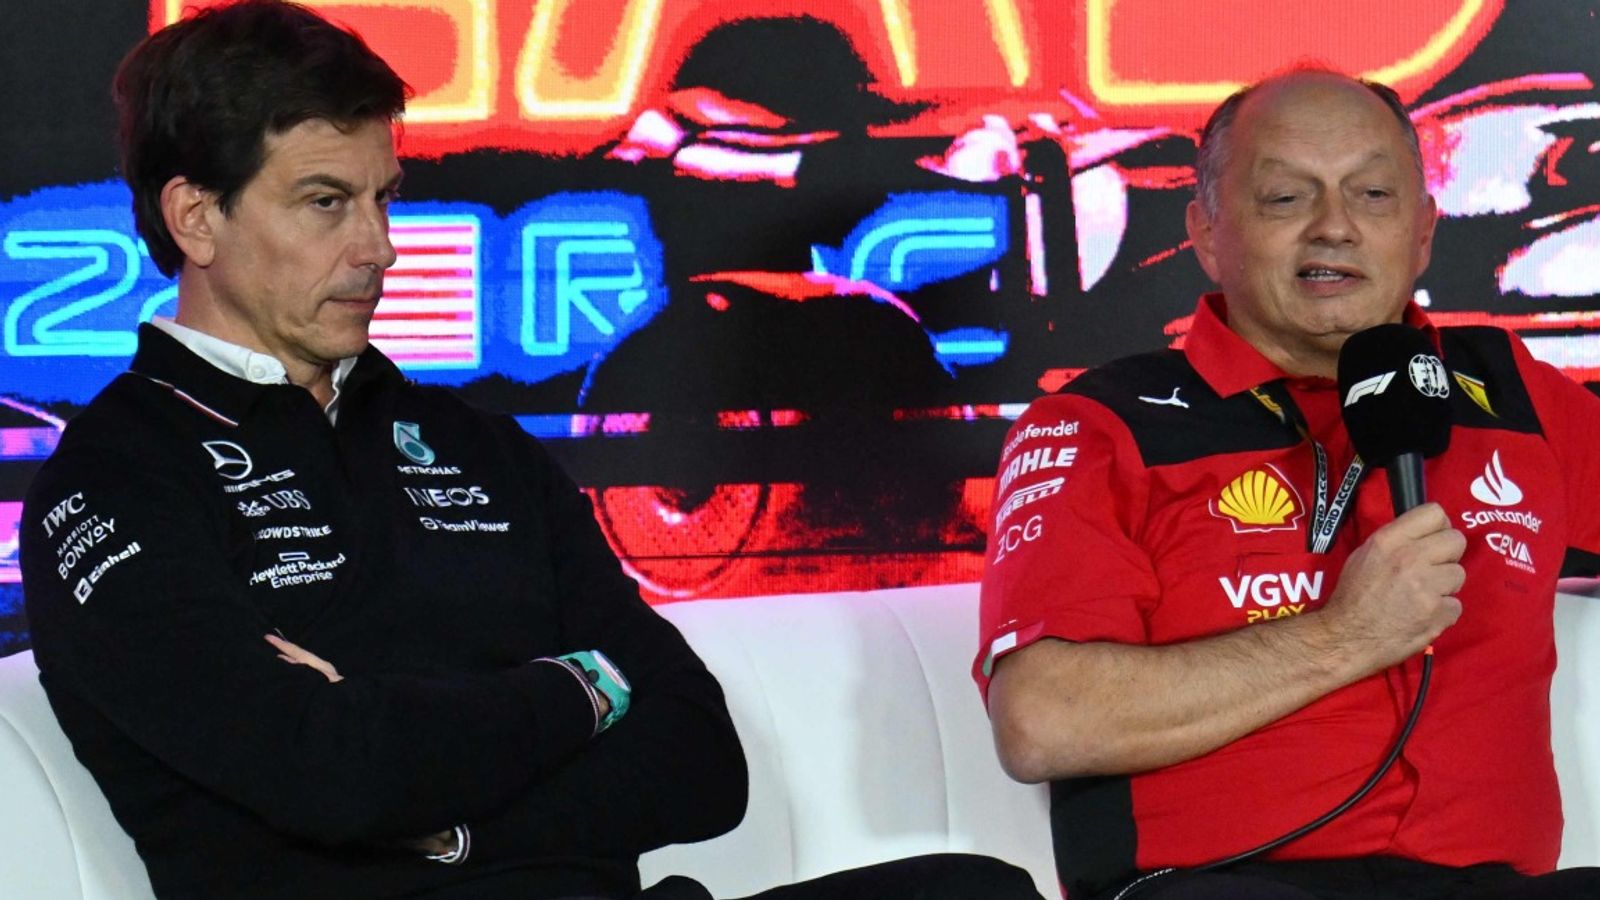 Mercedes chief Toto Wolff and Ferrari boss Fred Vasseur given formal warnings for ‘unacceptable’ language in Las Vegas